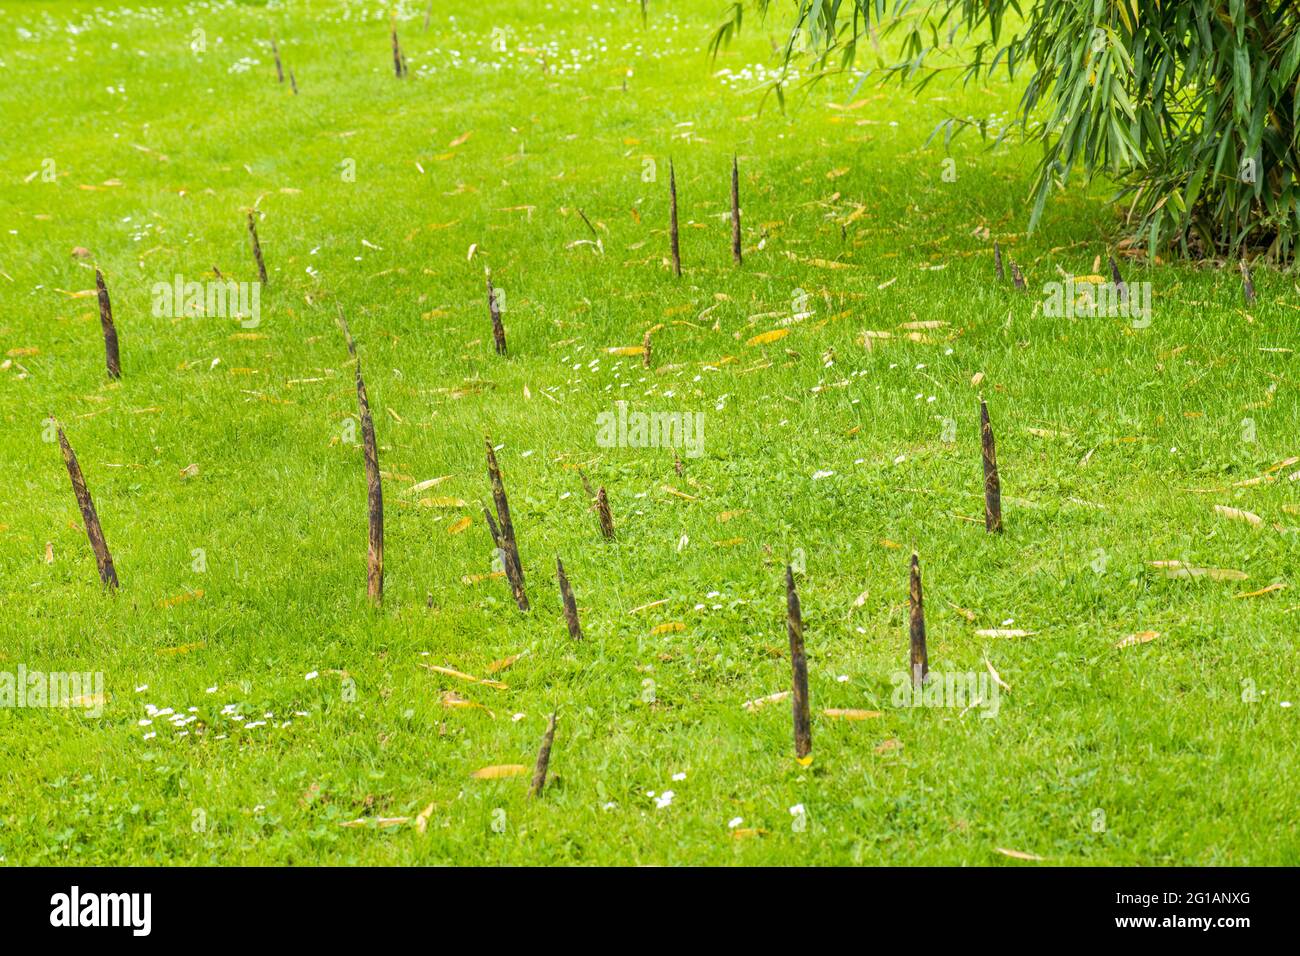 bamboo sprouts pointed, spear-like hard shoots, sprouts from the lawn in the neighborhood of the bamboo mother plant, Garden, problem Stock Photo